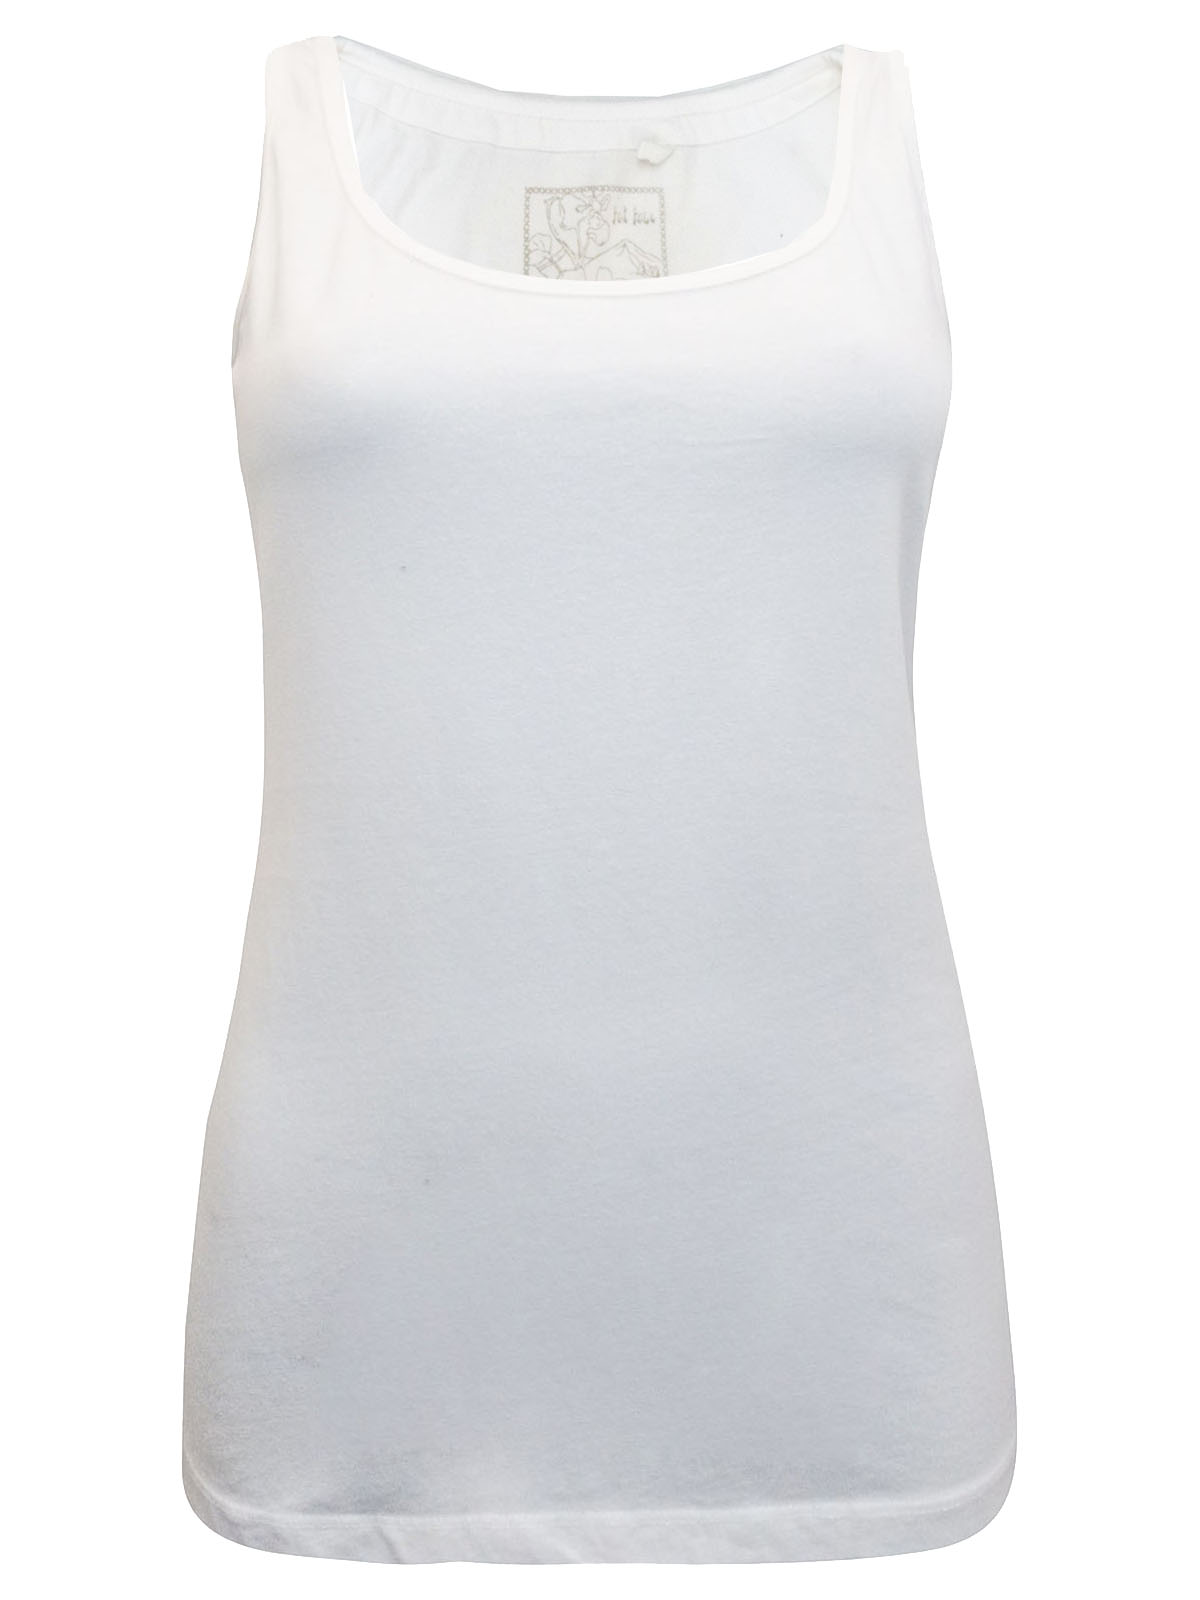 FAT FACE - - Fat Face WHITE Cotton Rich Sleeveless Vest Top - Size 10 to 14